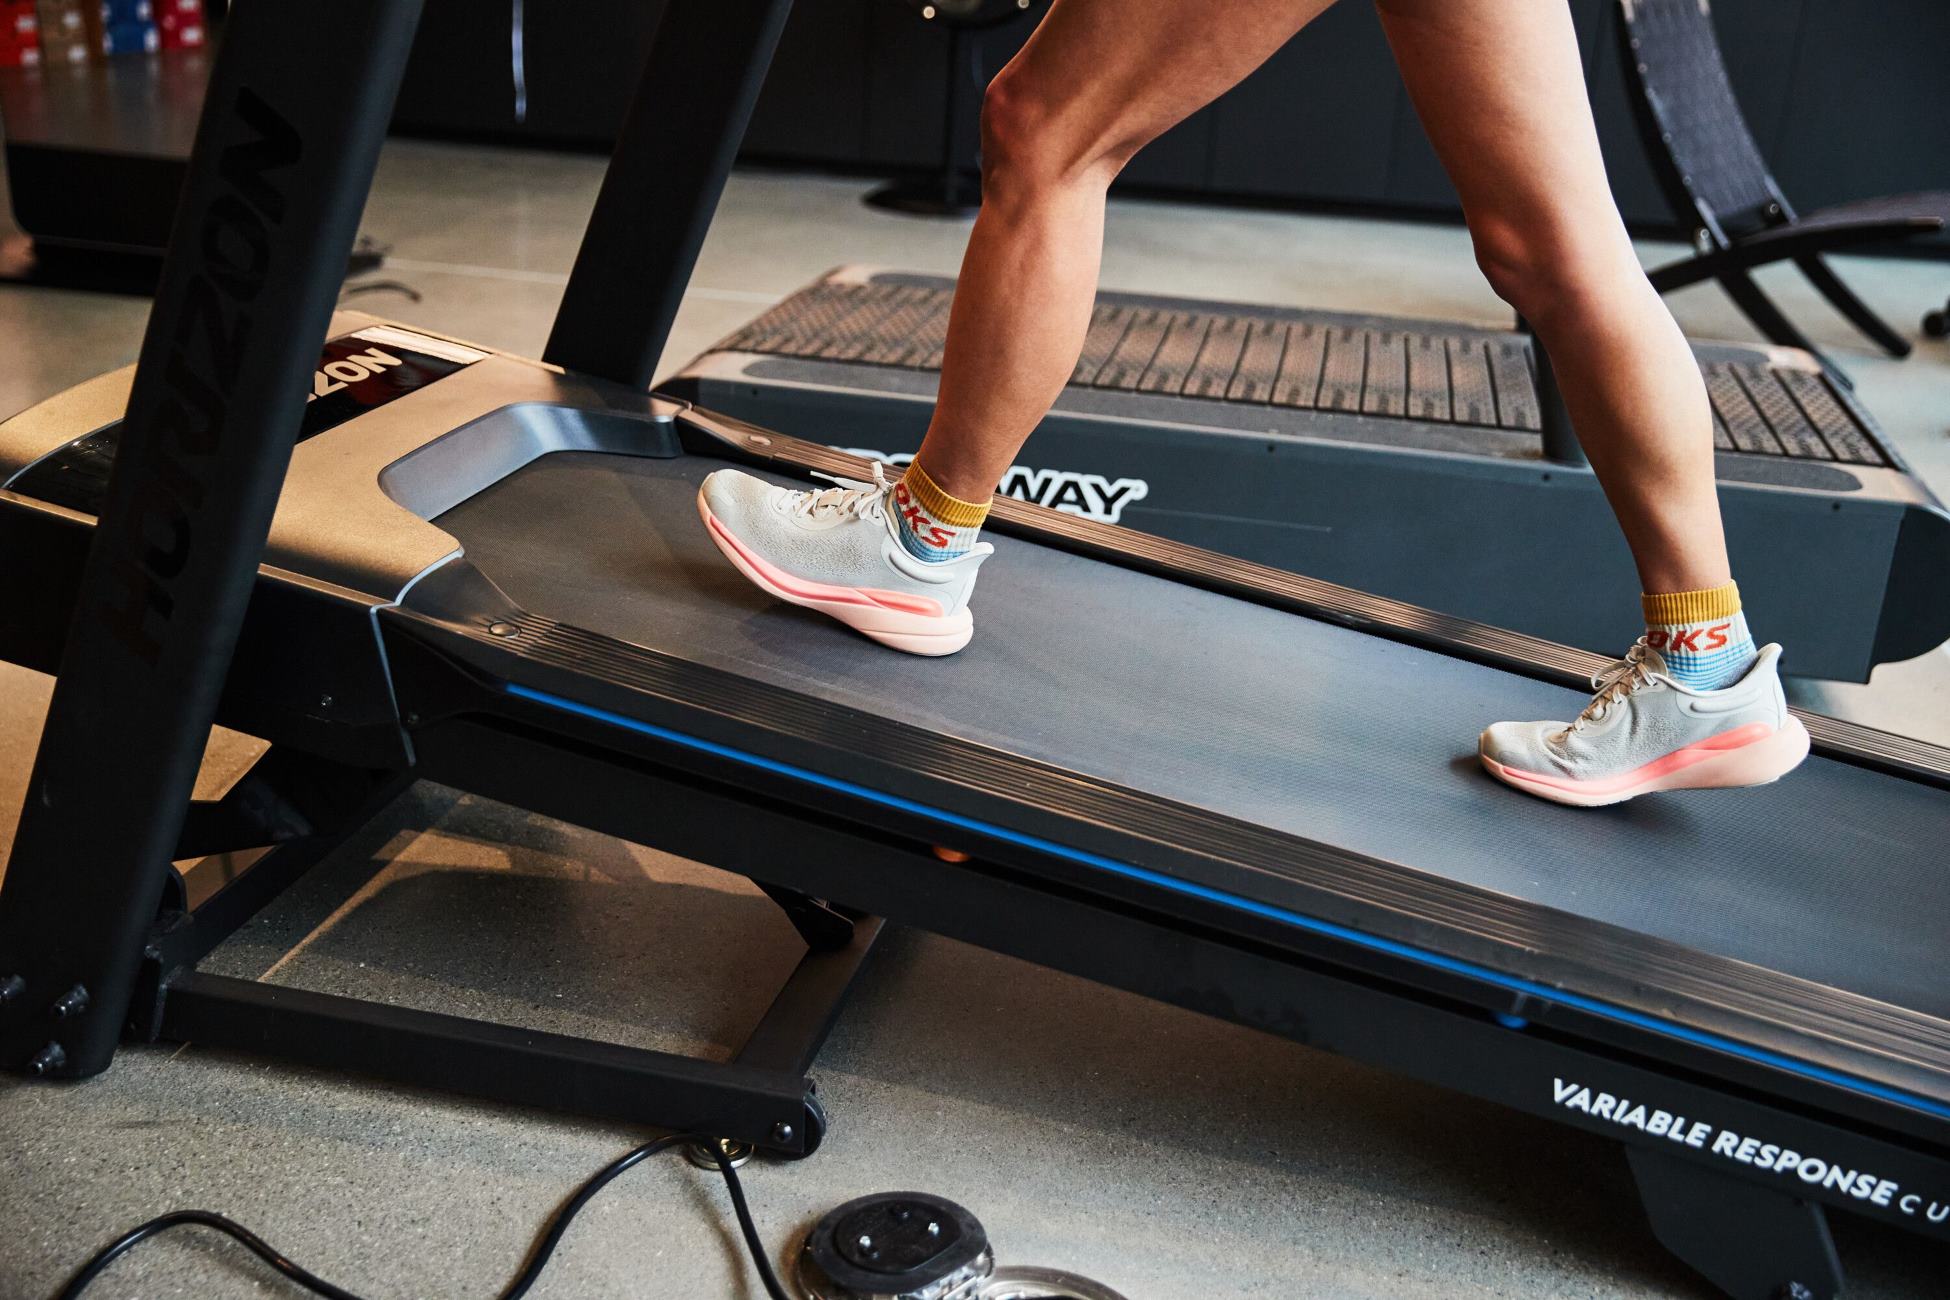 Best Incline For A Treadmill Workout